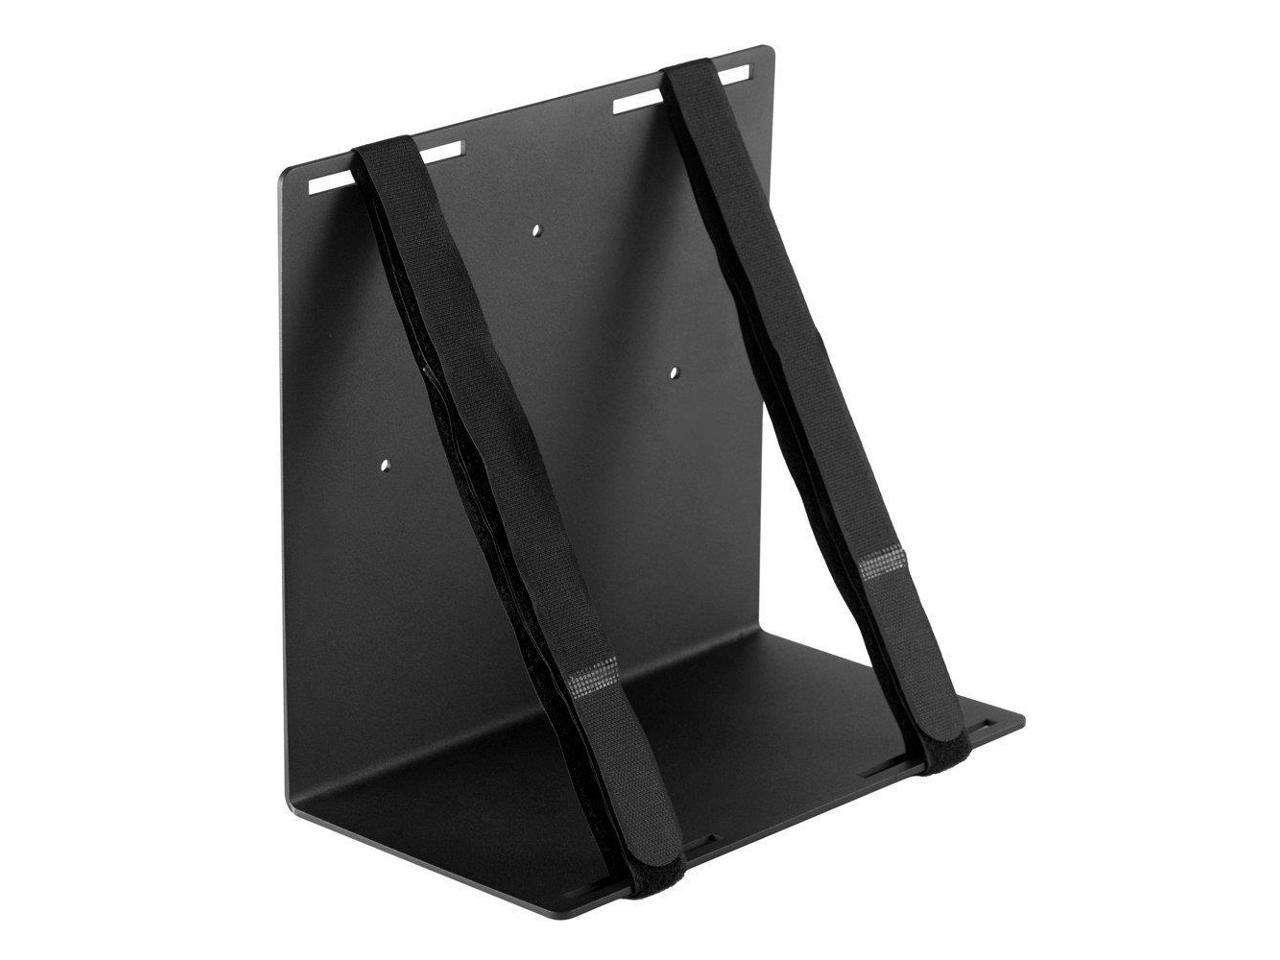 Oeveo Universal Mount 600-10H x 6W x 10D | Adjustable Computer Wall Mount, UPS Mount, or Other Electronic Device Mount UNVM-600 - Click Image to Close